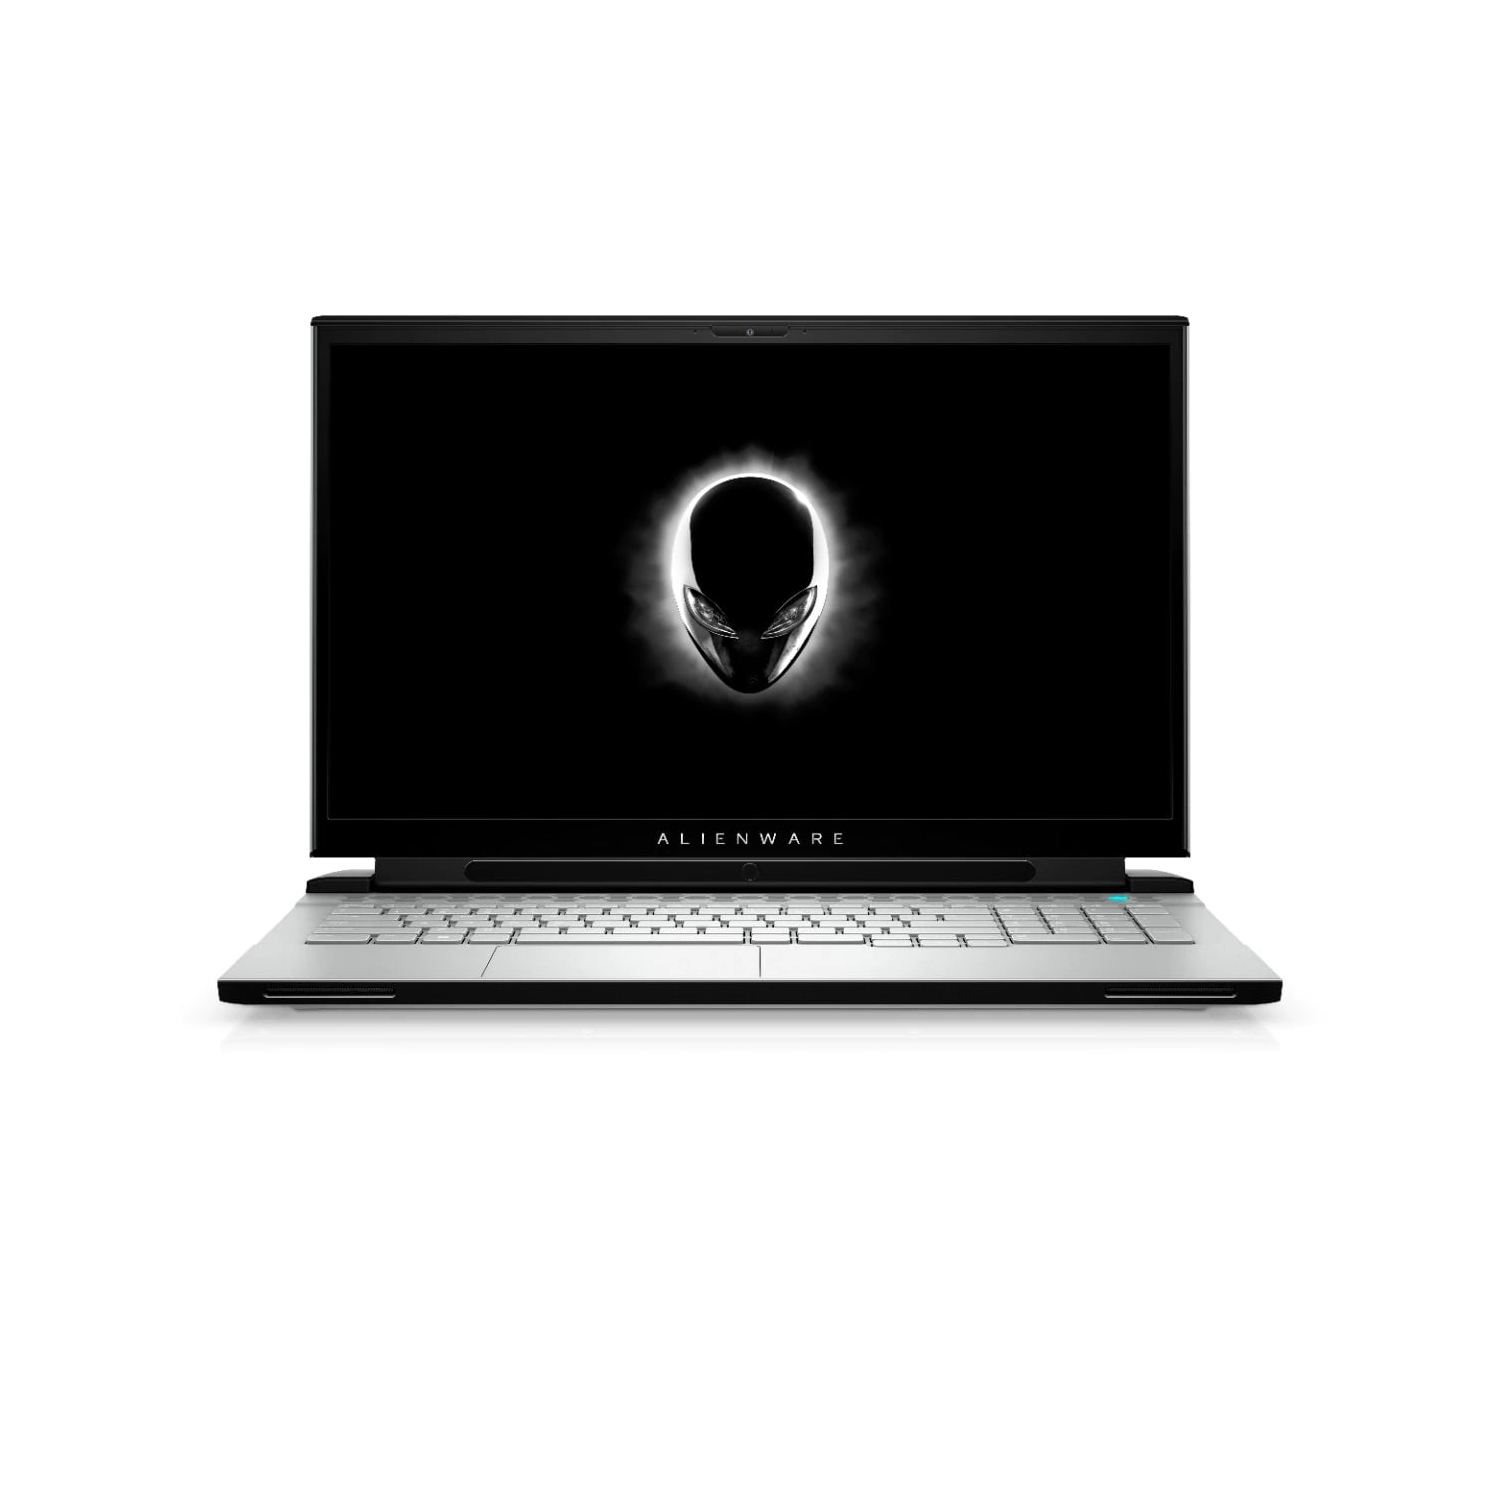 Refurbished (Excellent) - Dell Alienware m17 R3 Gaming Laptop (2020), 17.3" FHD, Core i7, 512GB SSD + 512GB SSD, 16GB RAM, RTX 2070, 5 GHz, 10th Gen CPU Certified